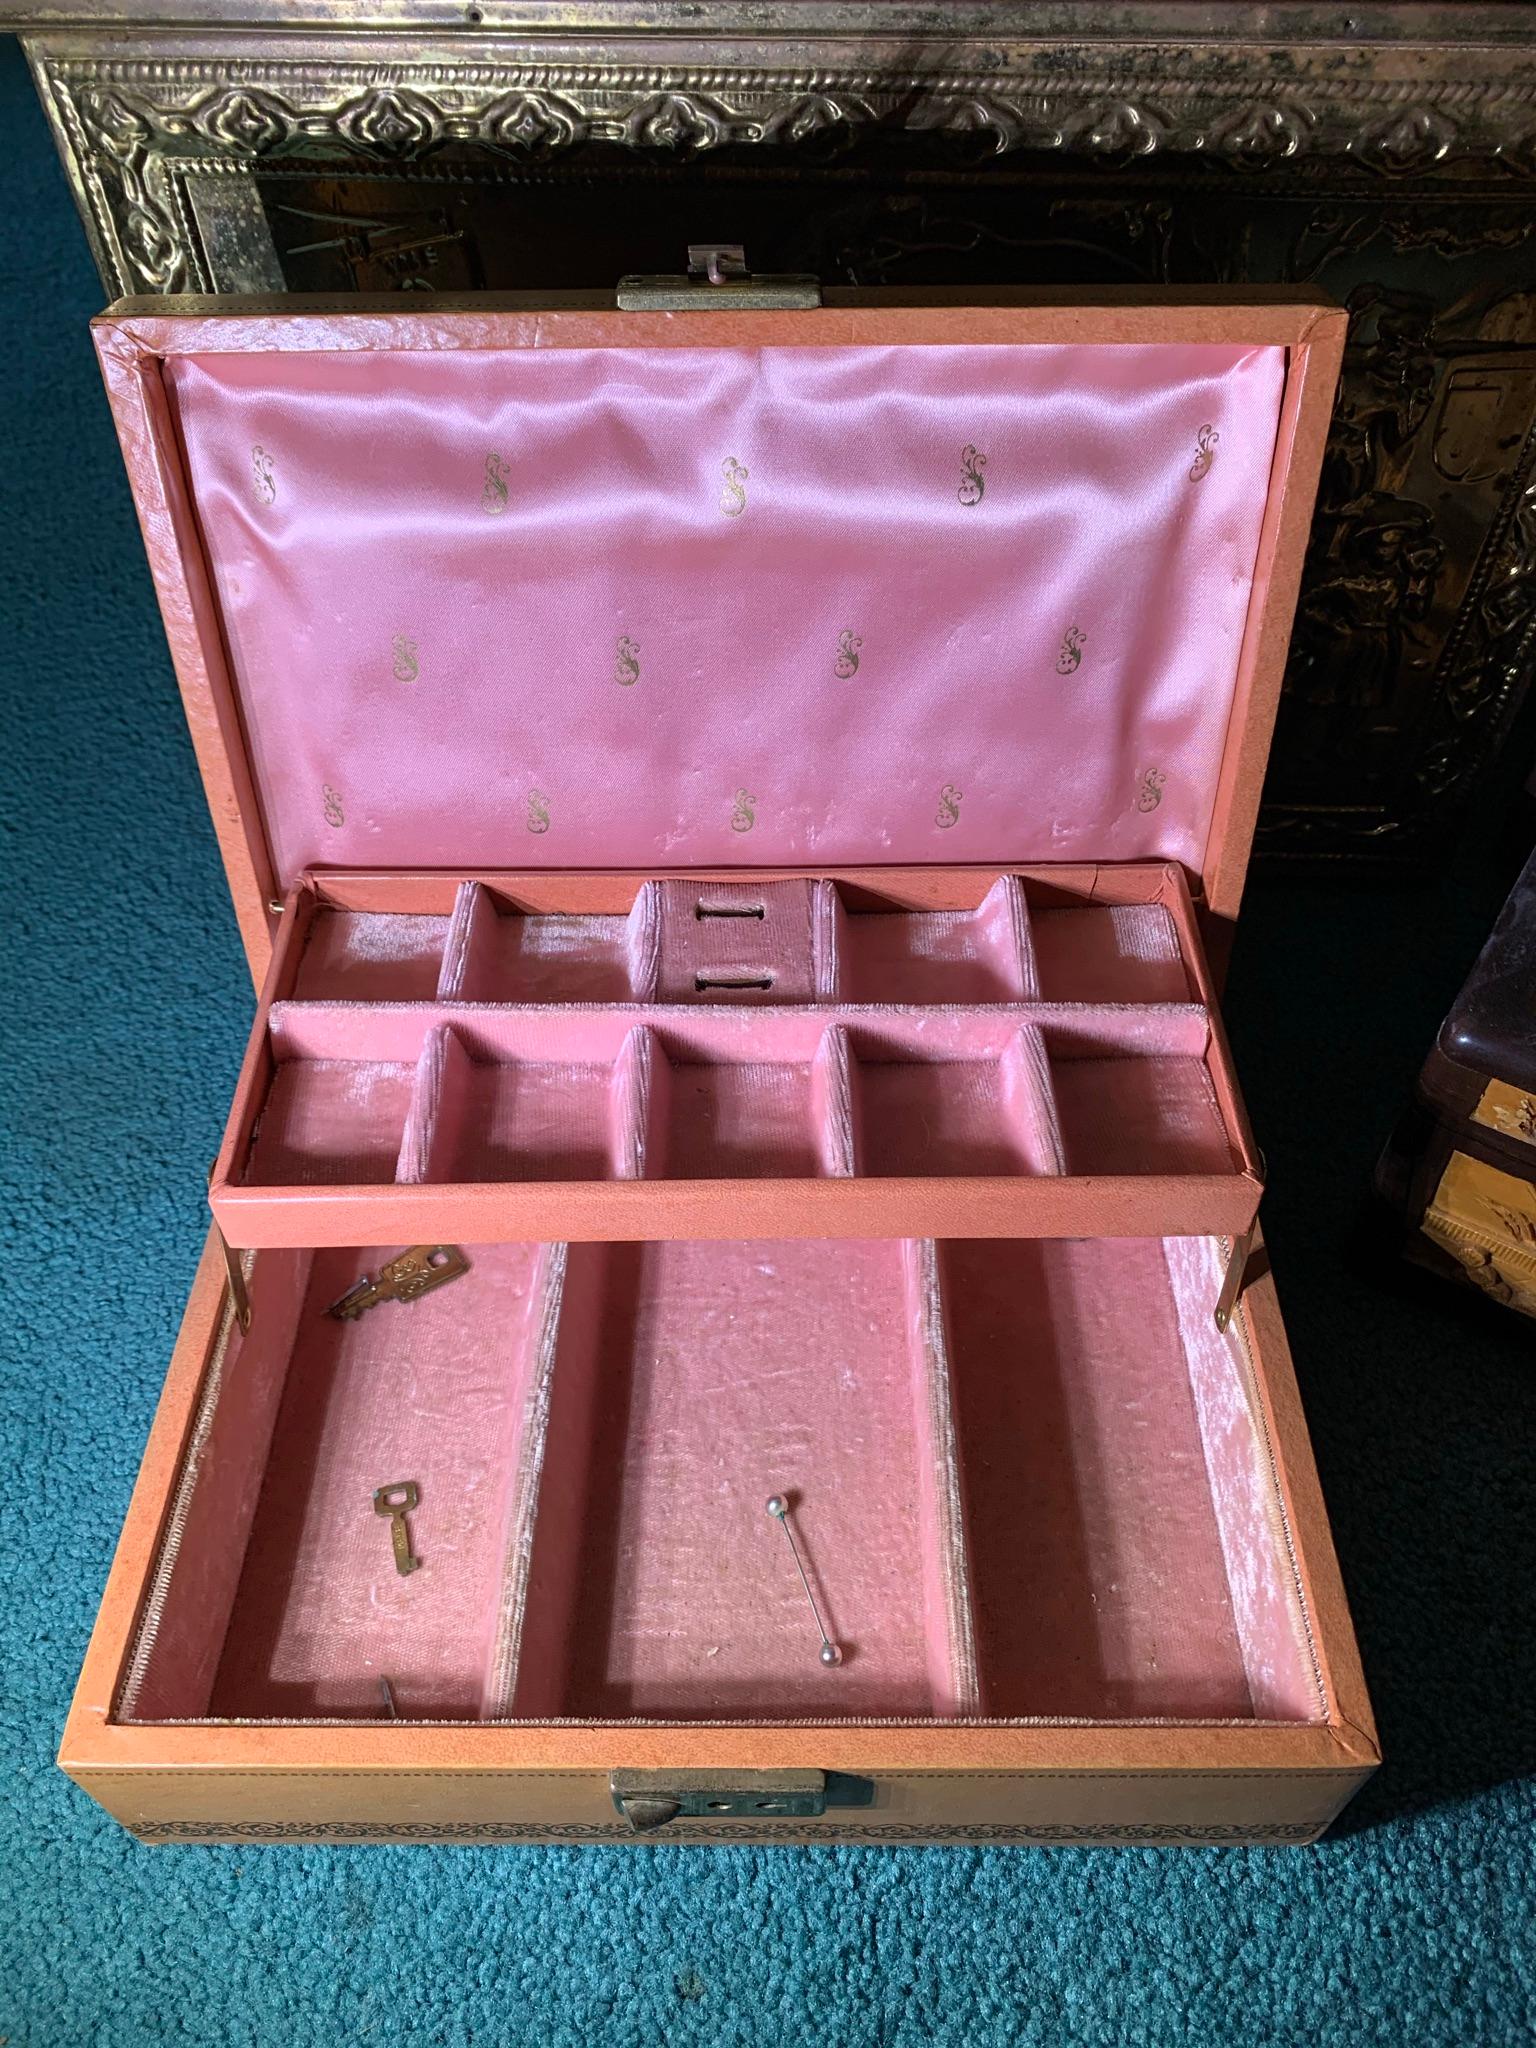 Jewelry Boxes, Magazine Holder, Puzzle and More